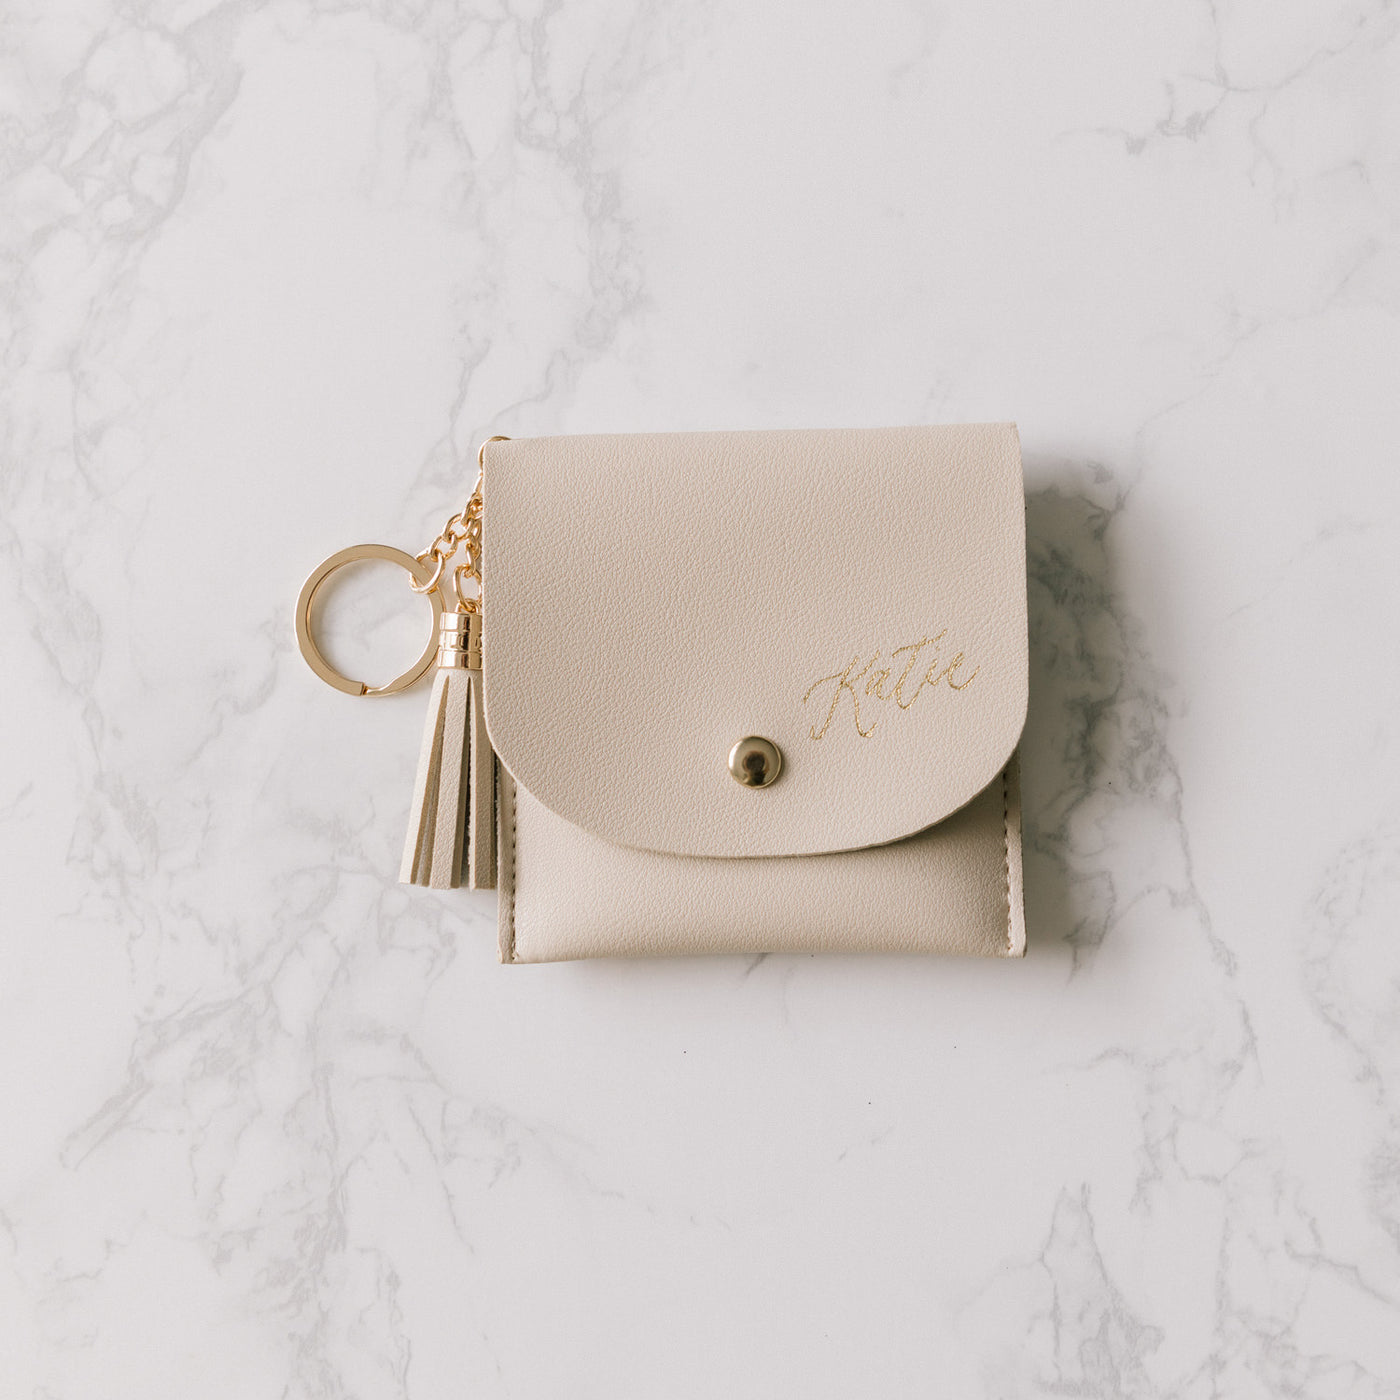 Gold Foil Personalized Lark and Ives Card Purse with Gold Hardware and Tassel / Mini Wallet / Flap Wallet